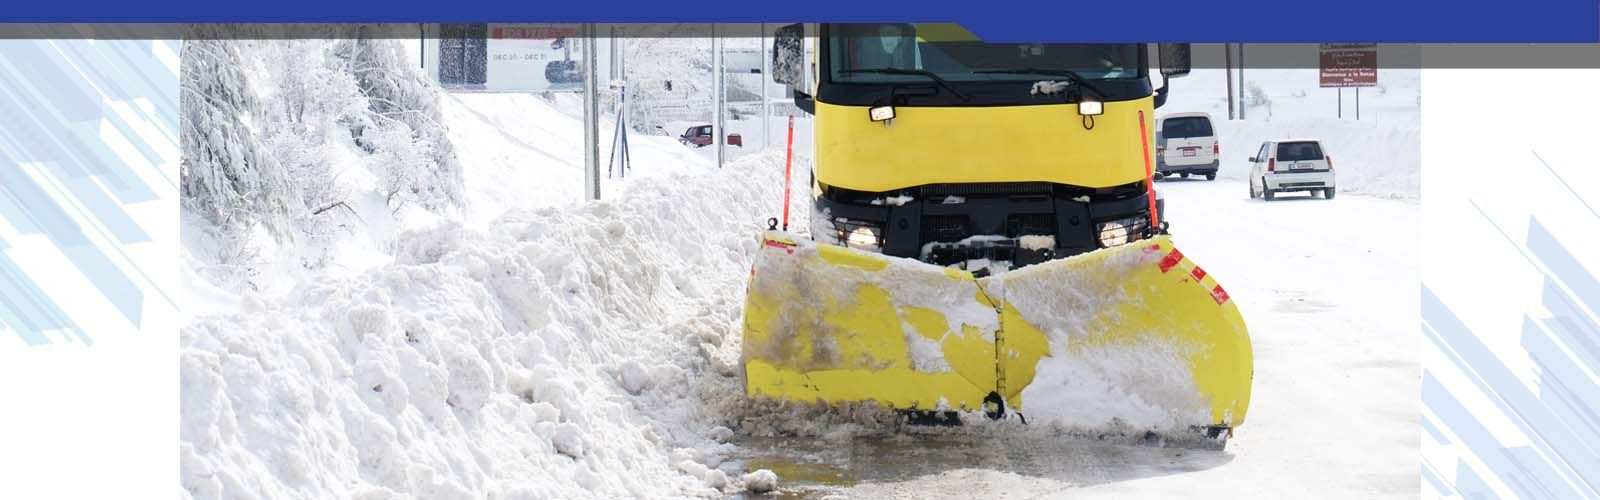 Snow service machines for ploughshare winter roads 03